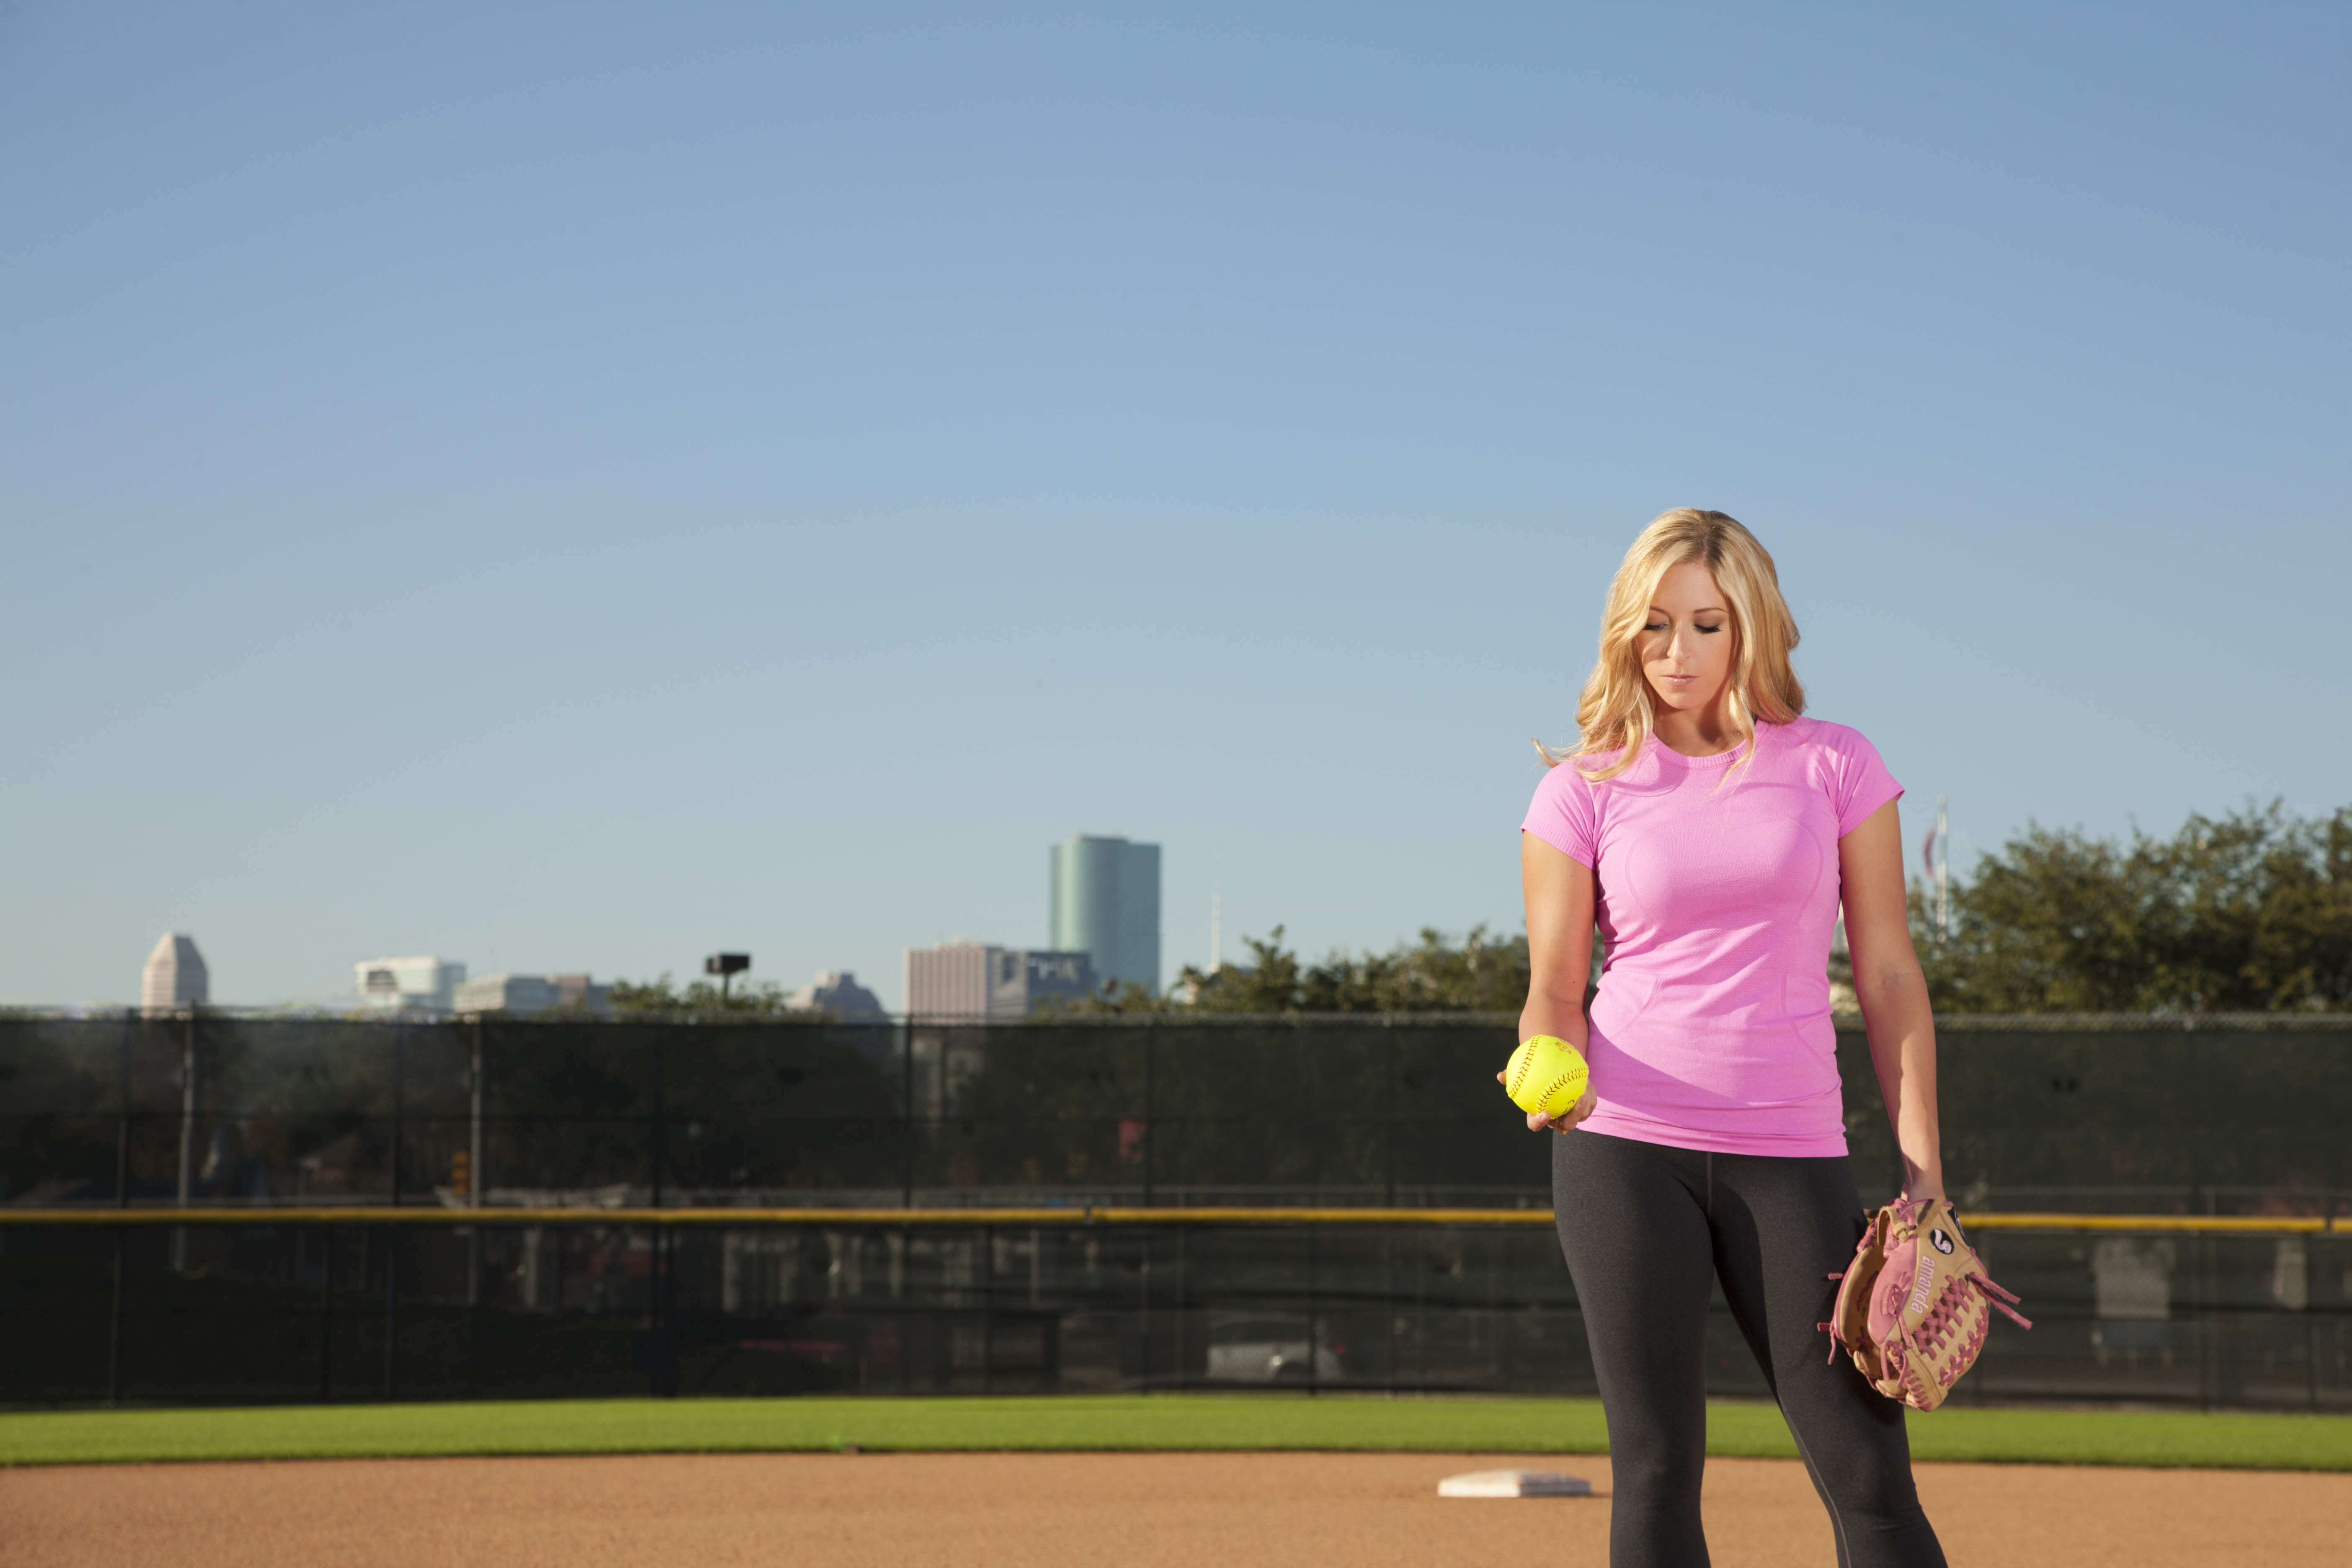 baseball quotes for girlfriends